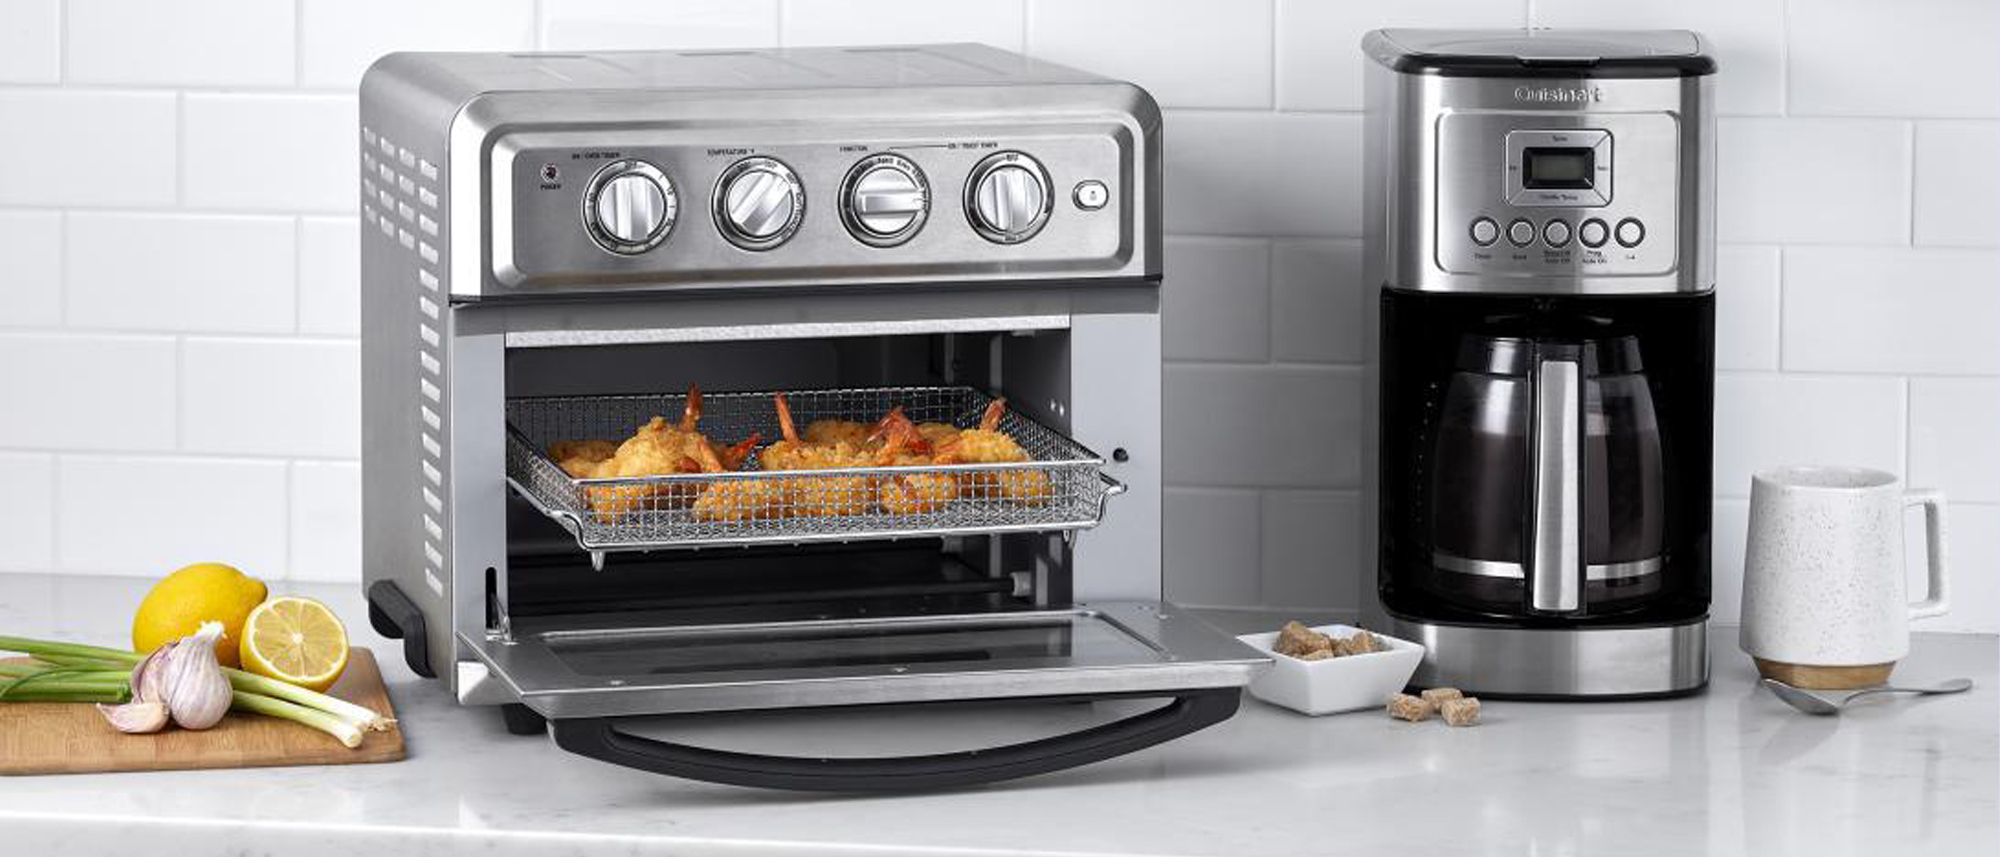 Air Fry Toaster Oven Cooking Chart